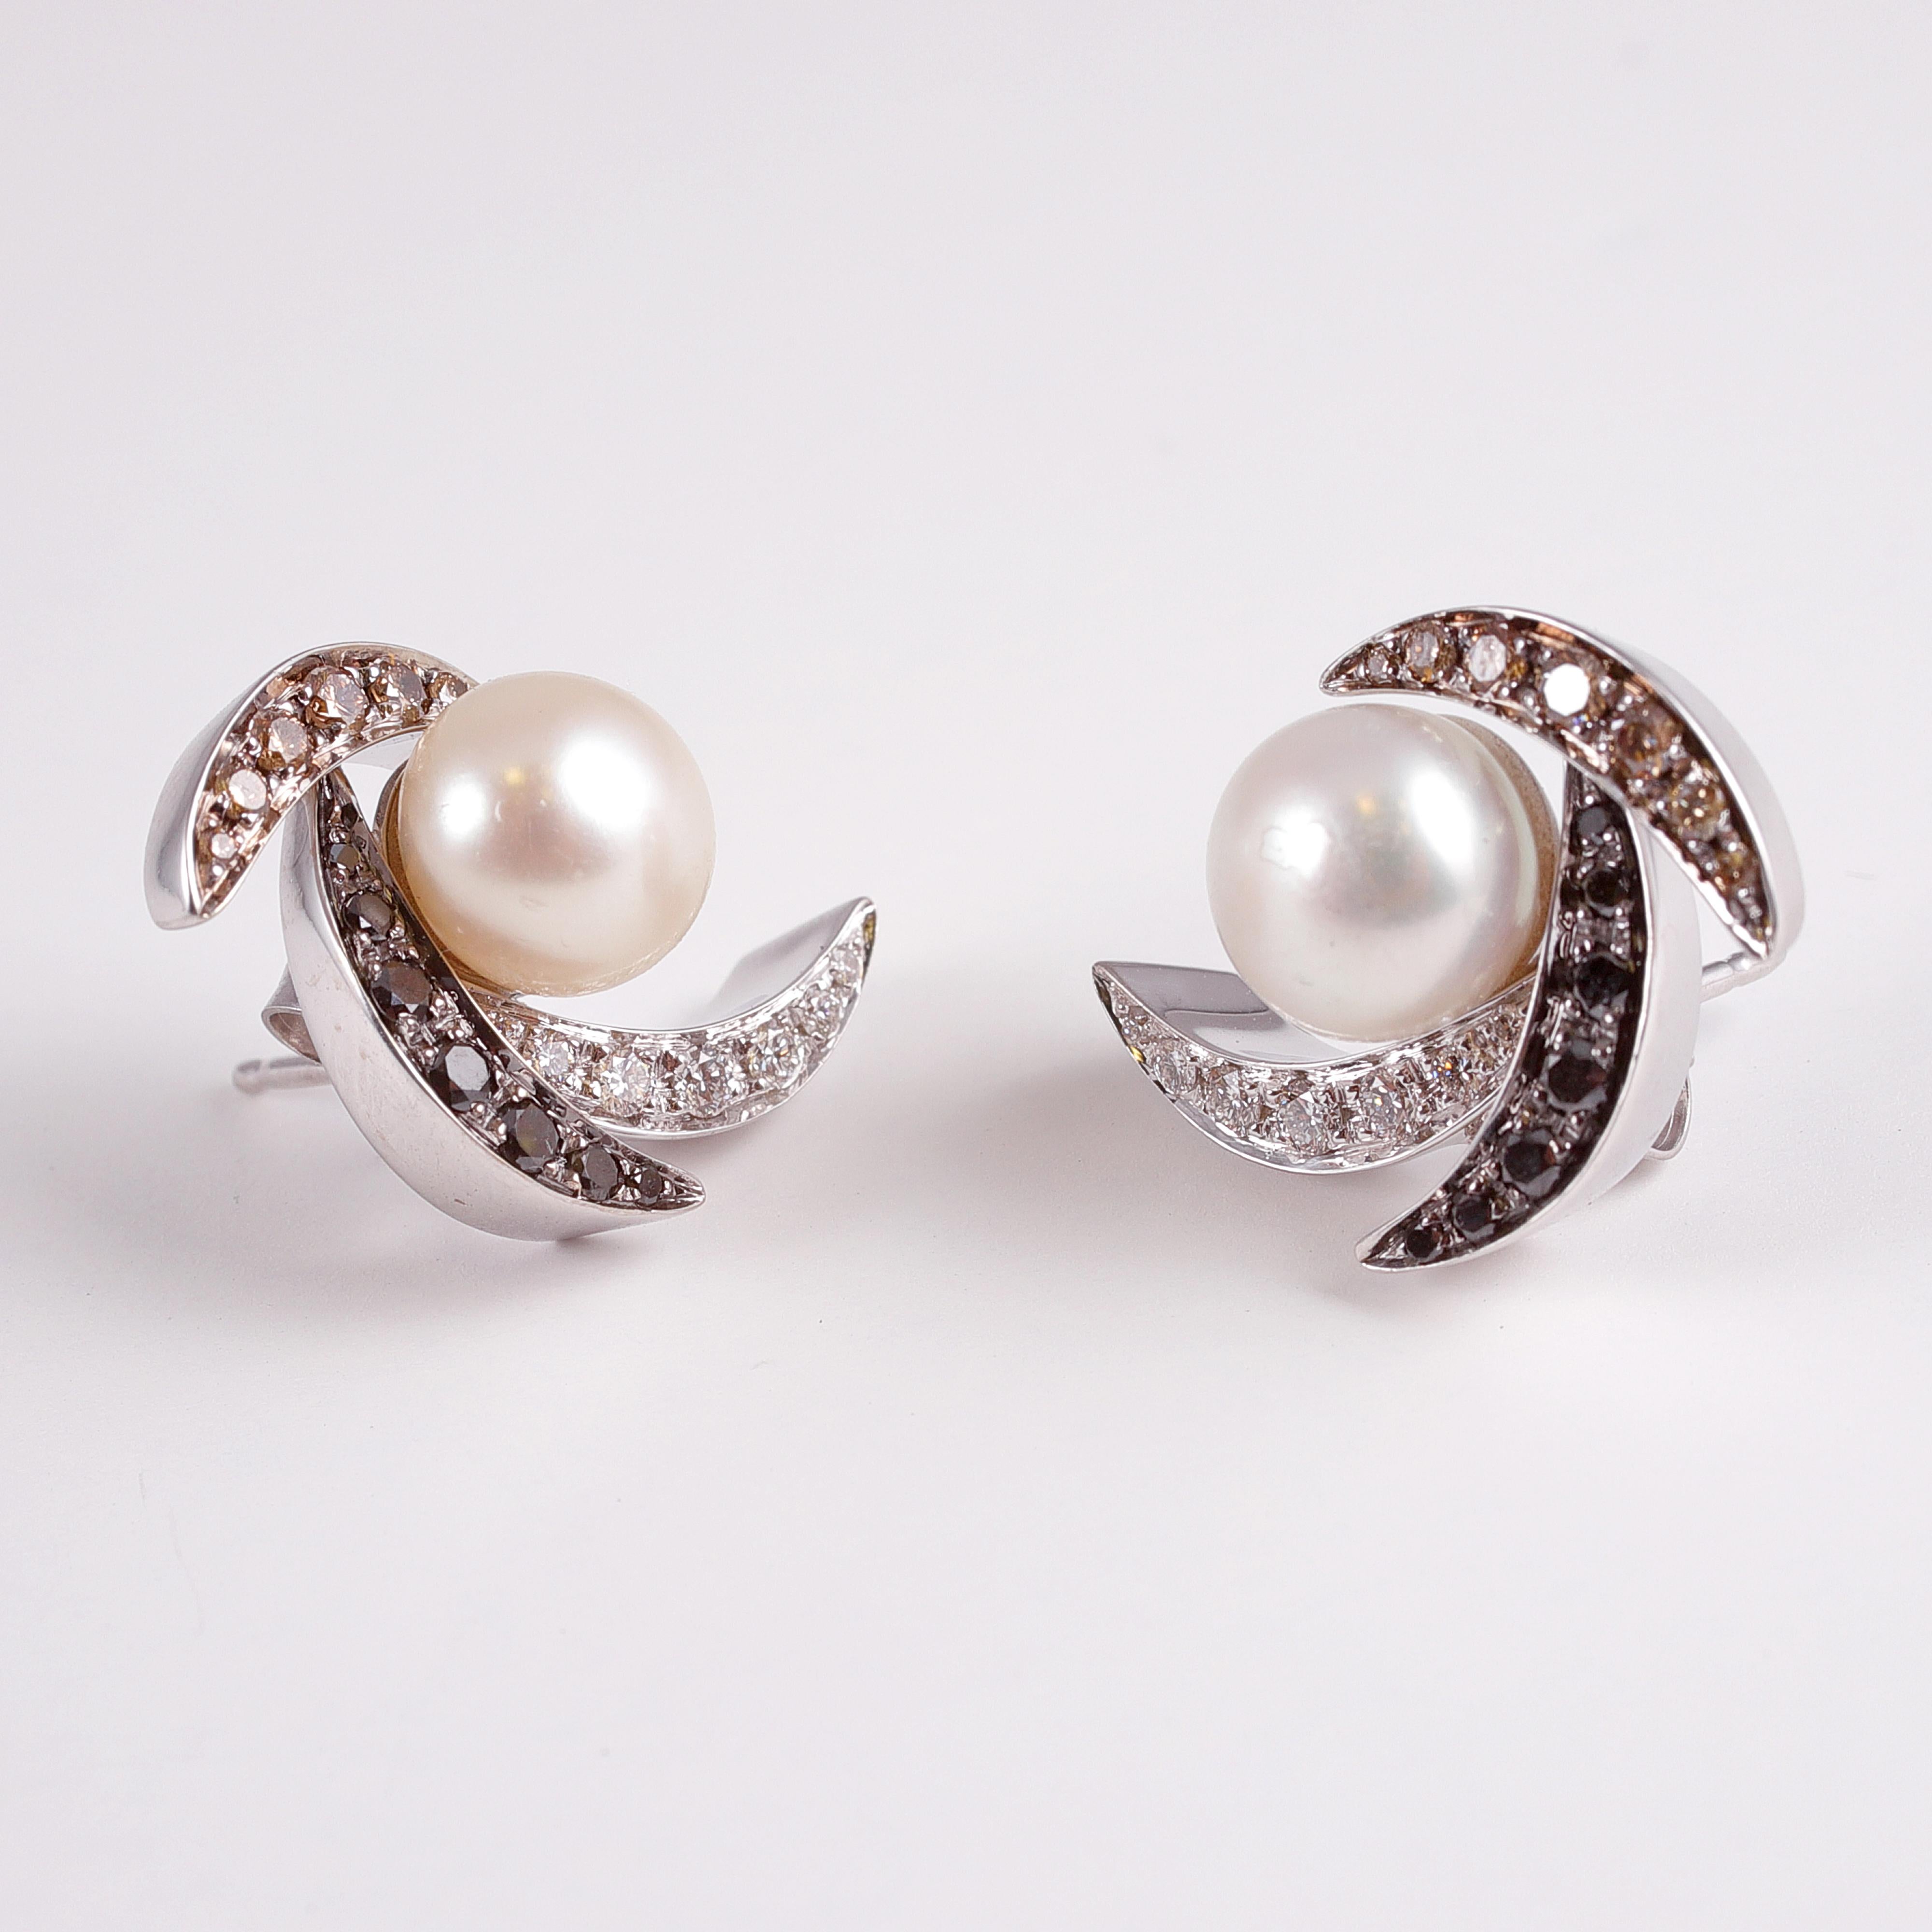 Round Cut Cultured Pearl with Diamond Earrings by IO Si